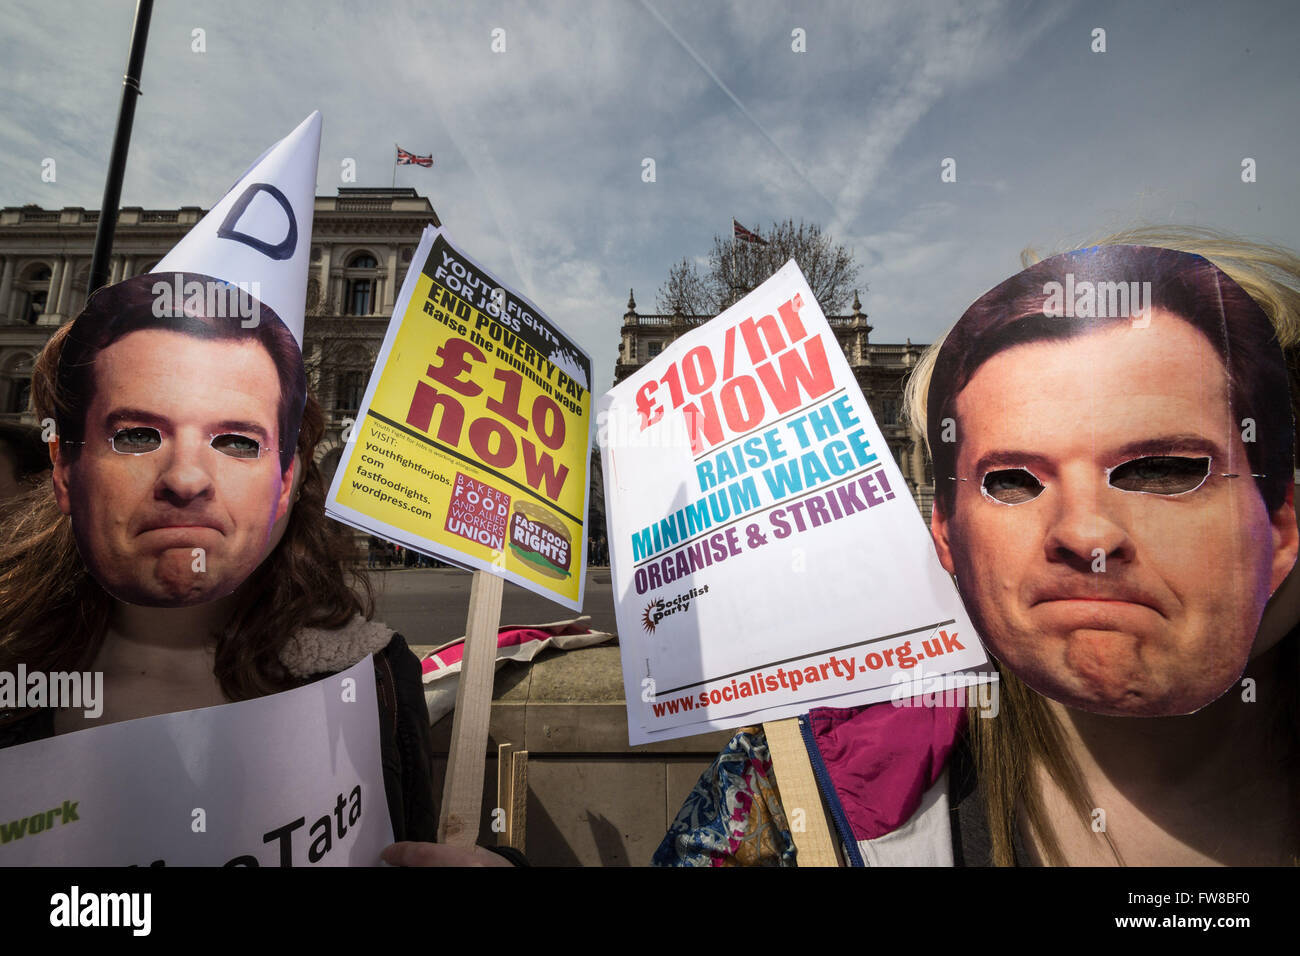 London, UK. 1st April, 2016. Fast Food Rights protest against the National Living Wage outside Downing Street demanding the National Living Wage to be raised to £10 per hour Credit:  Guy Corbishley/Alamy Live News Stock Photo